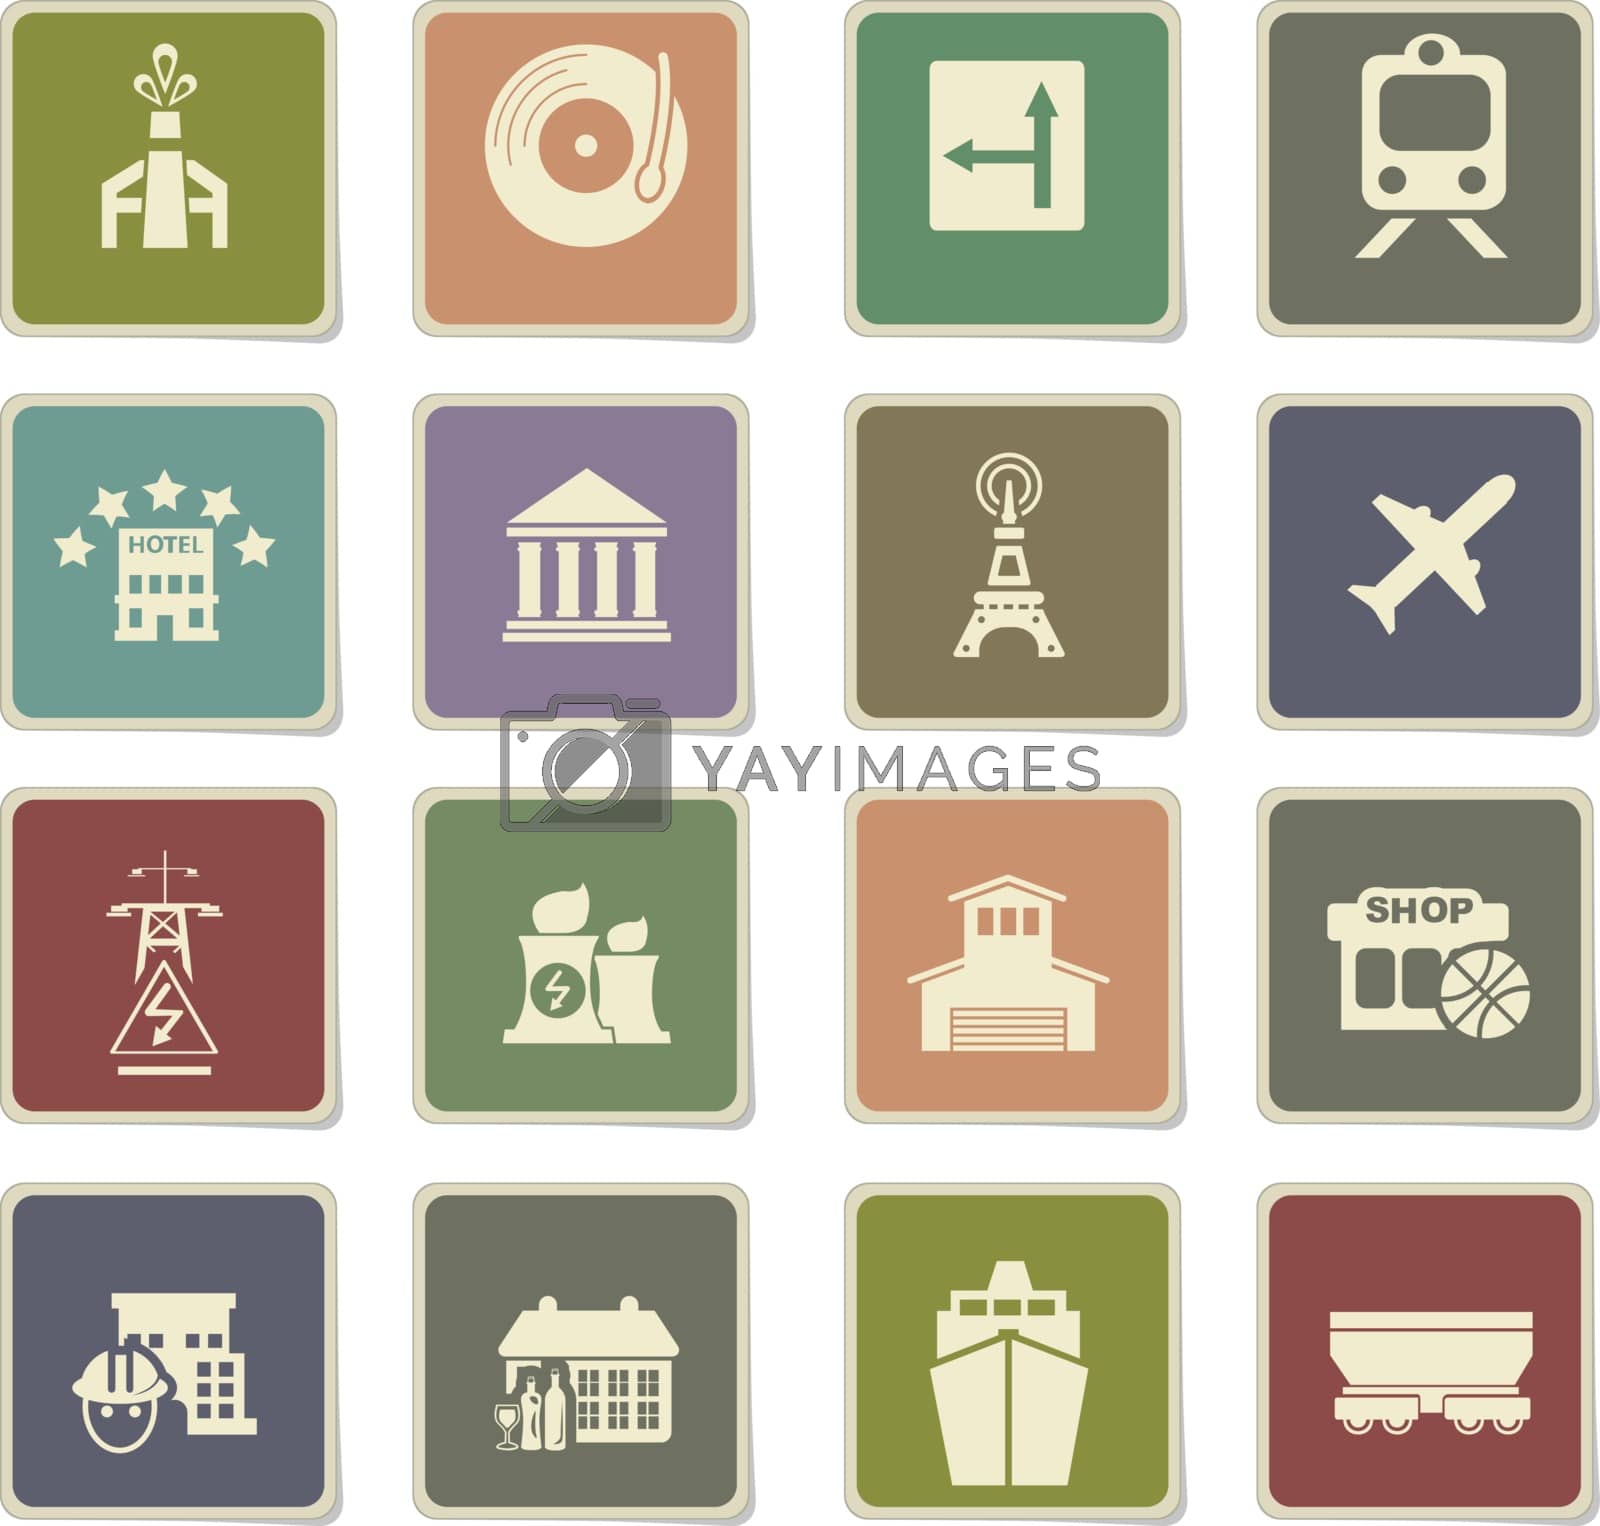 Royalty free image of infrastructure icon set by ayax